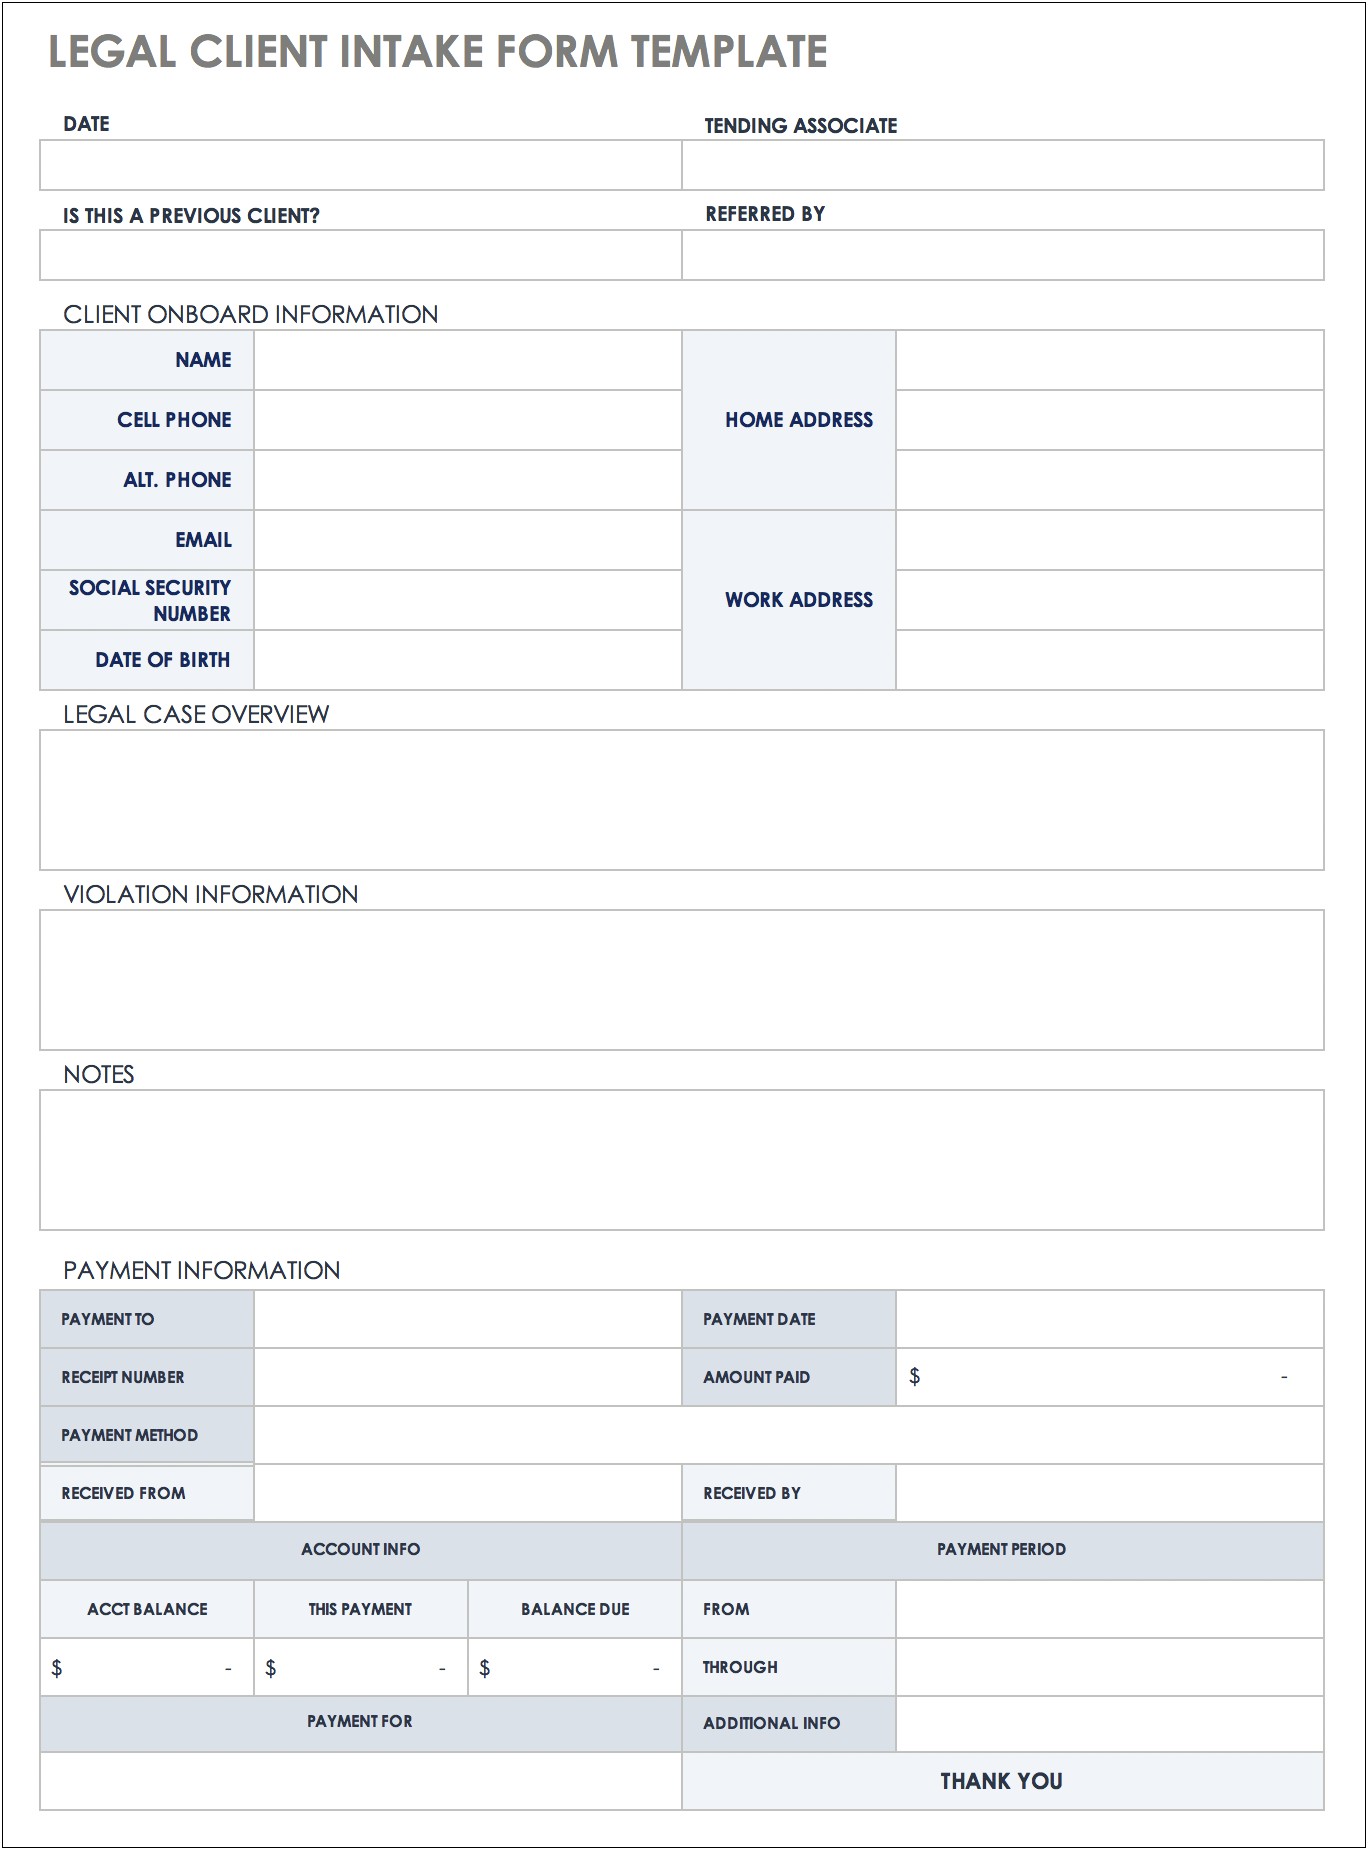 Client Intake Form Legal Template Download